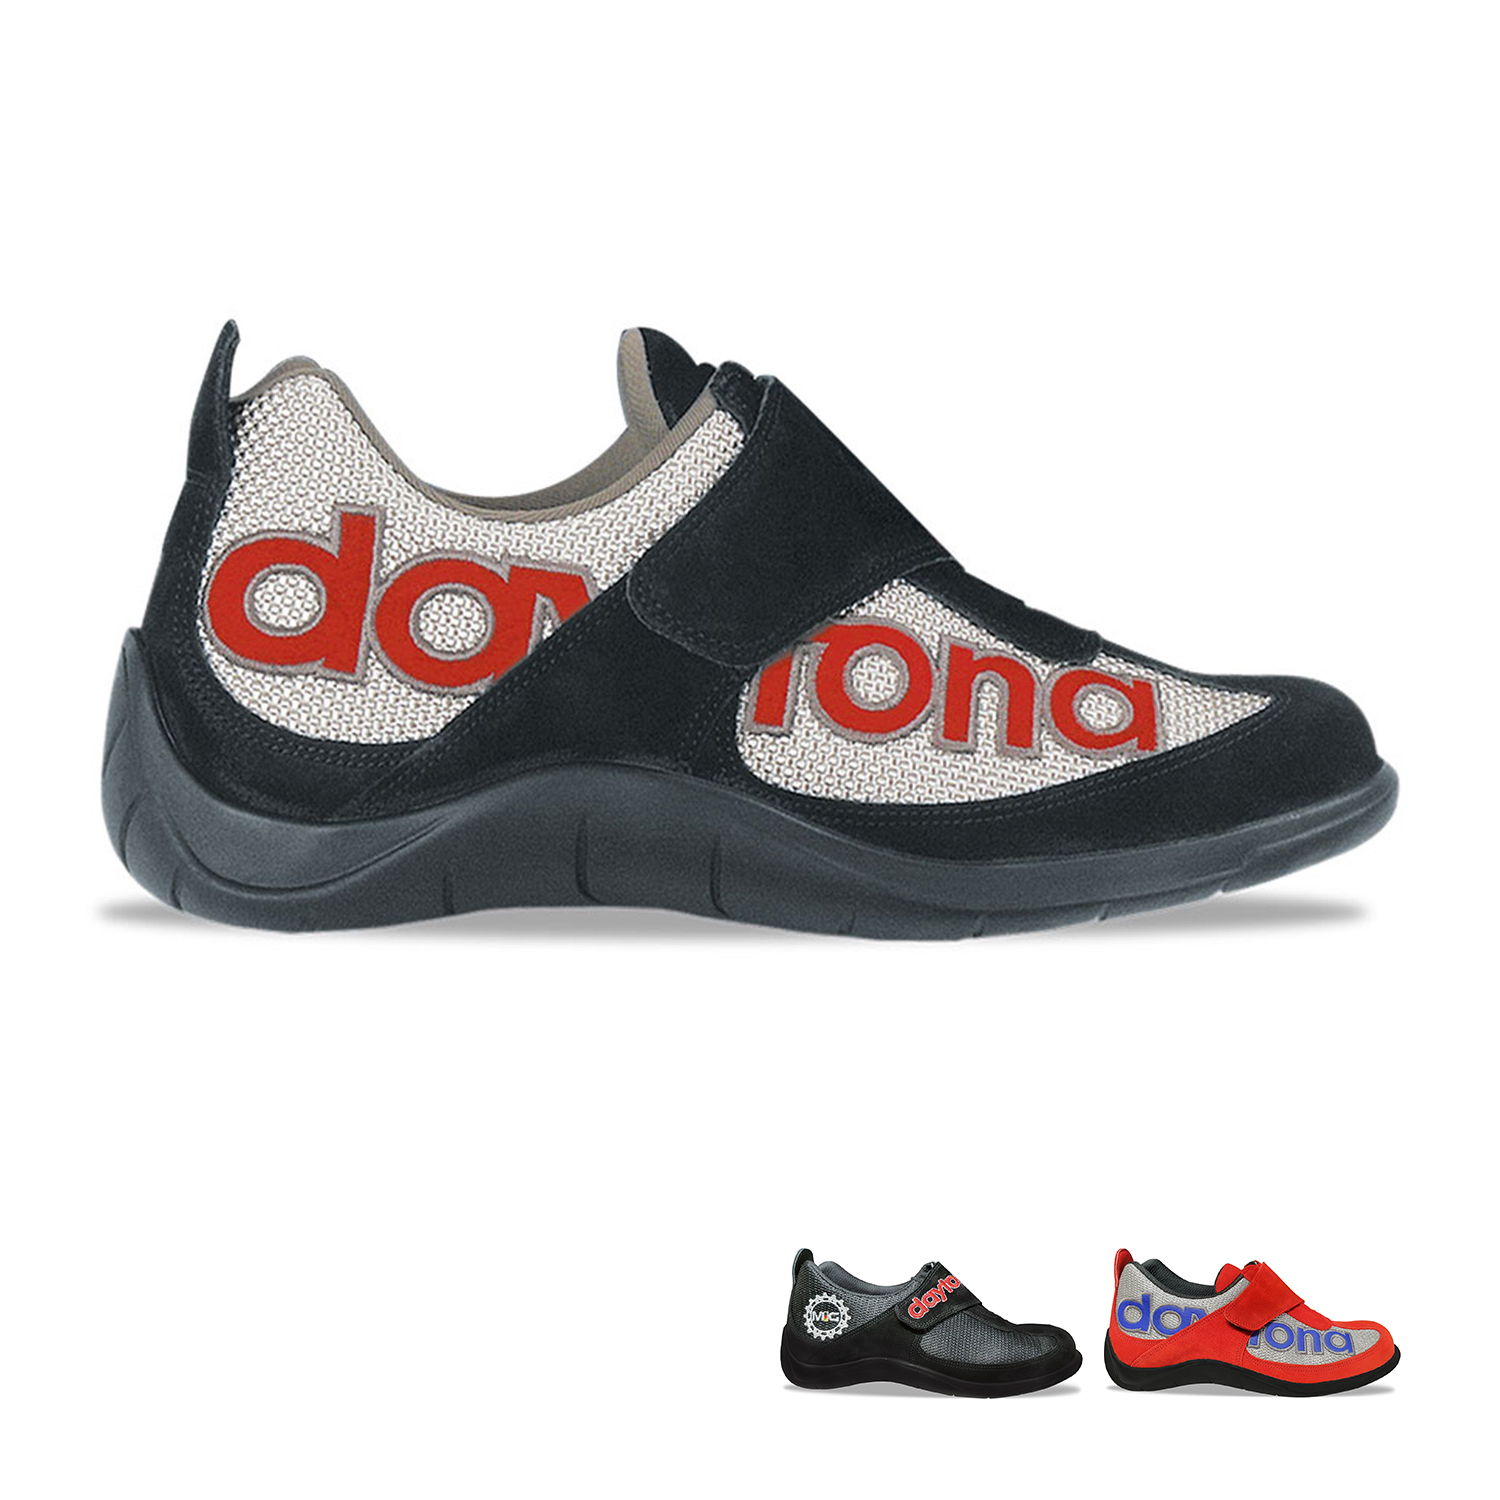 Daytona Moto Fun Sneaker - Available in Various Coulors and Sizes